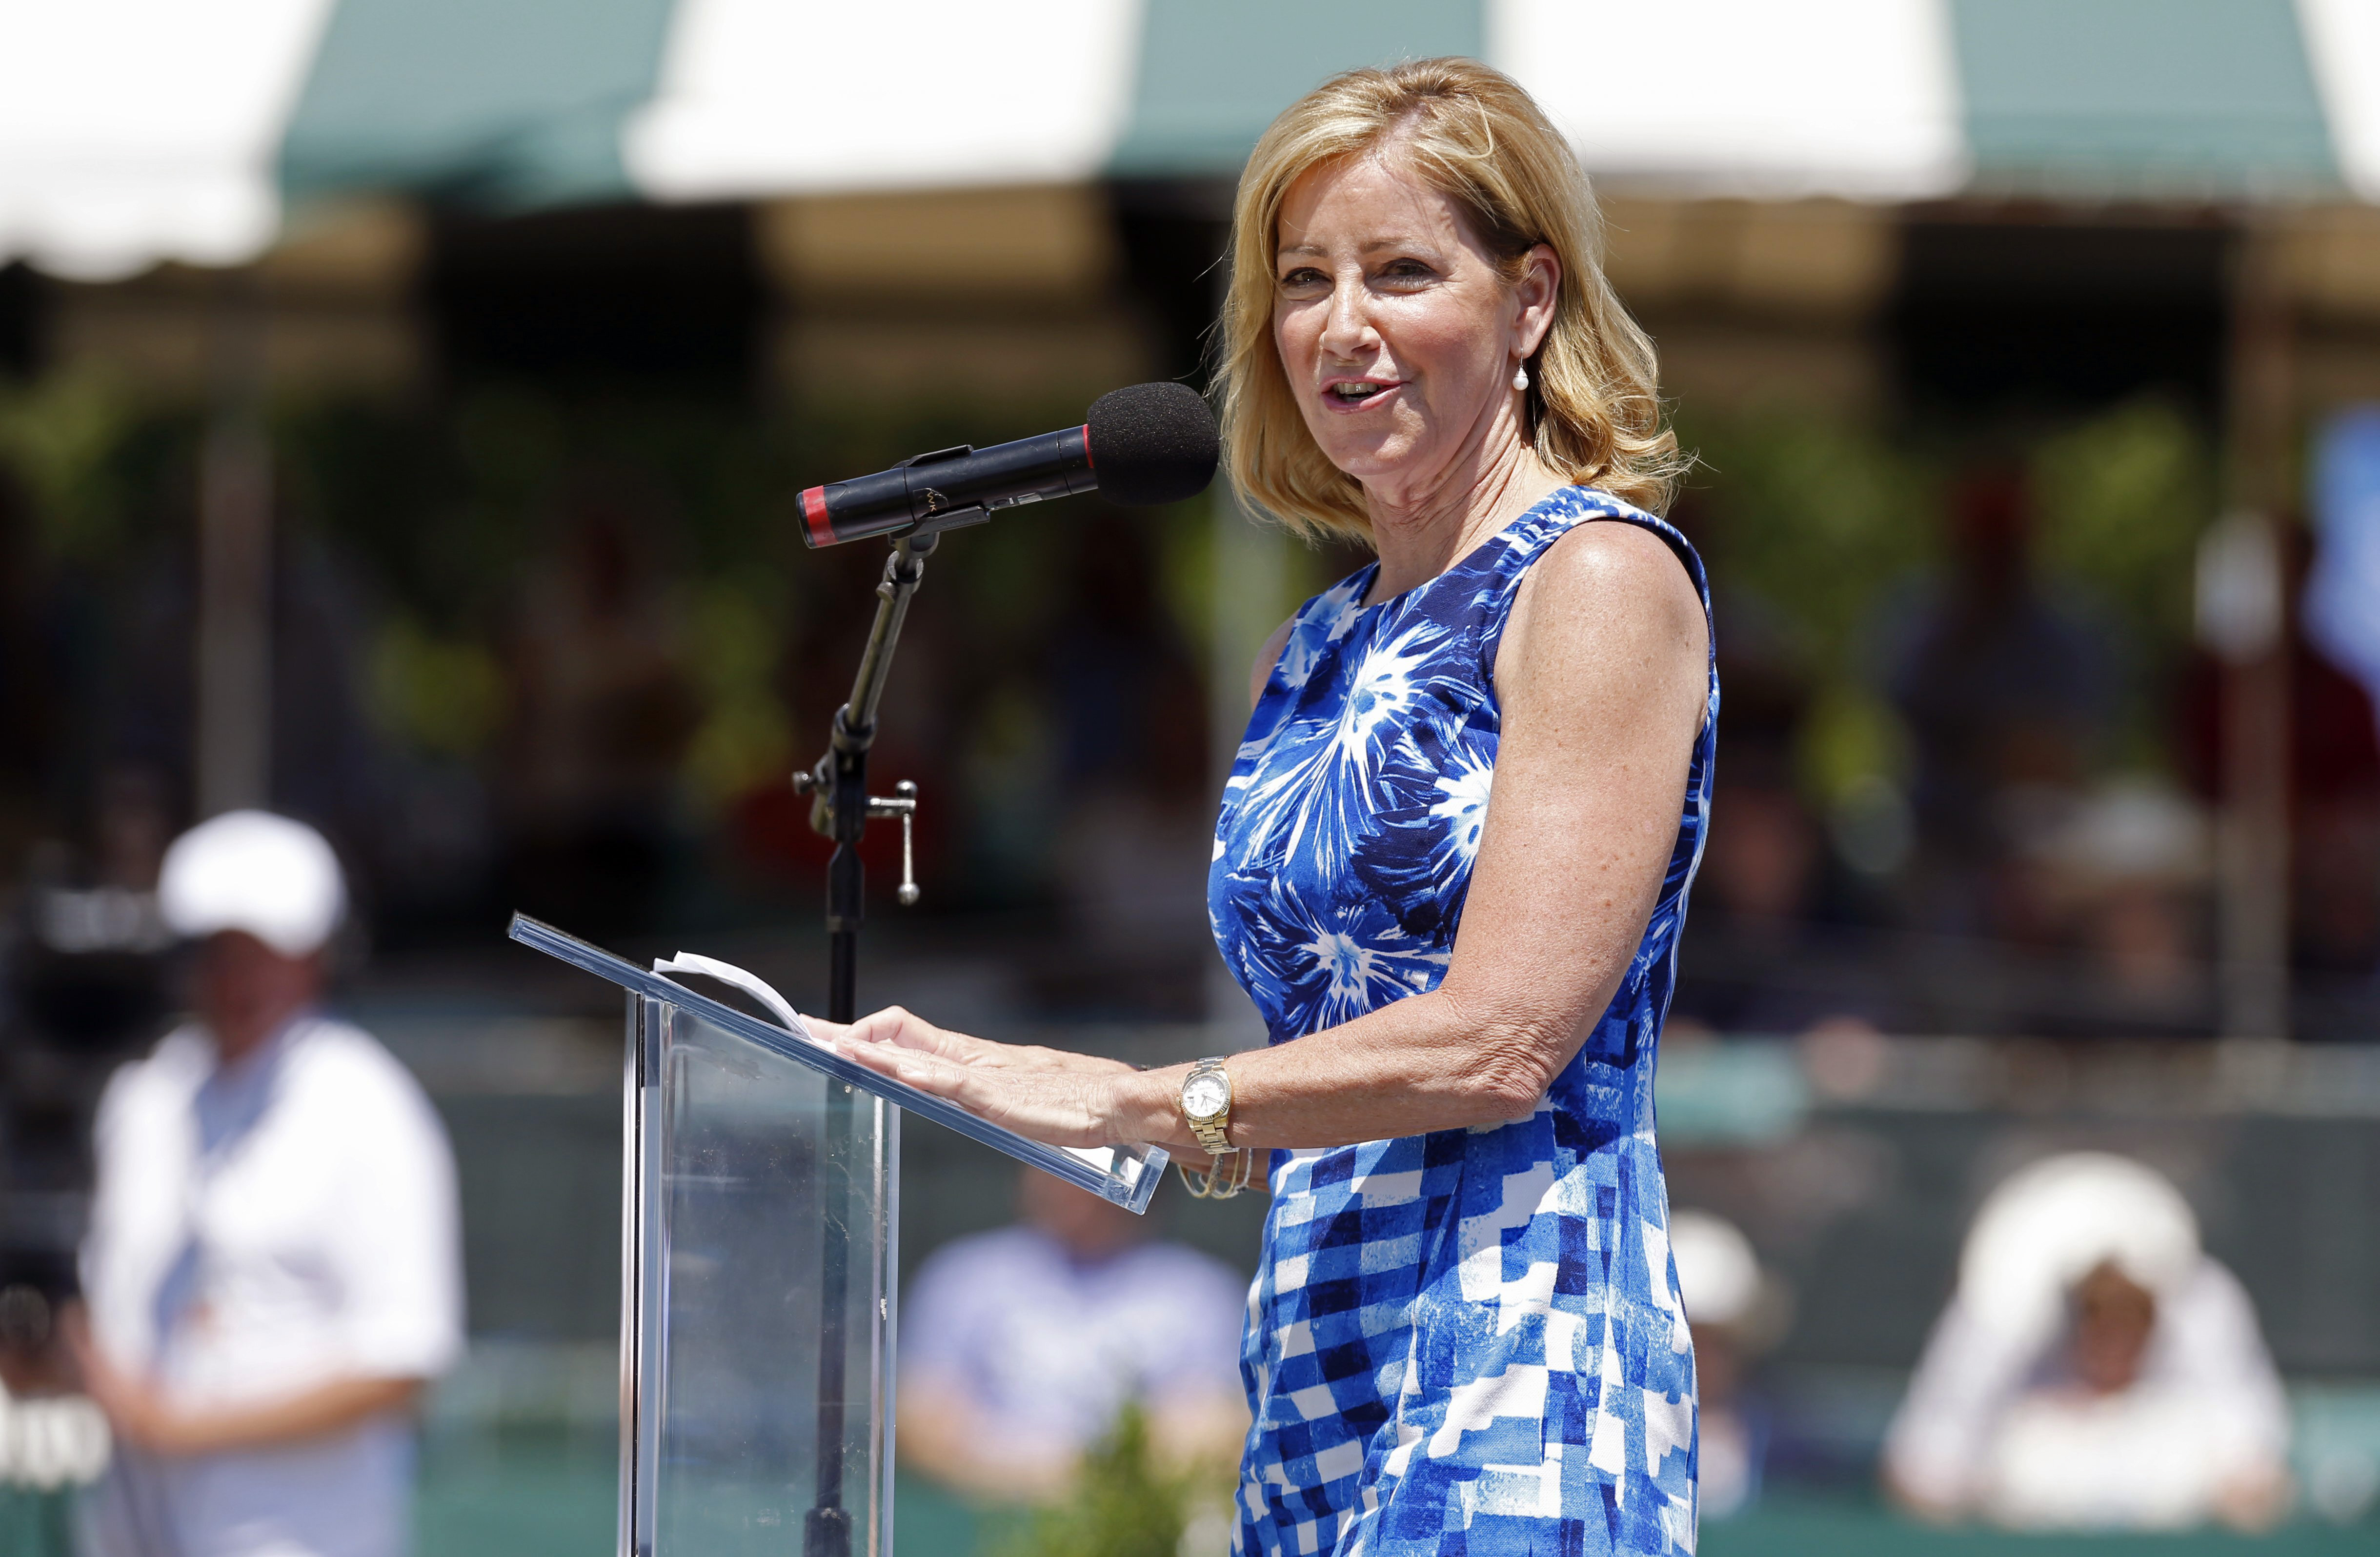 Chris Evert speaks during the induction ceremony at the International Tennis Hall of Fame.